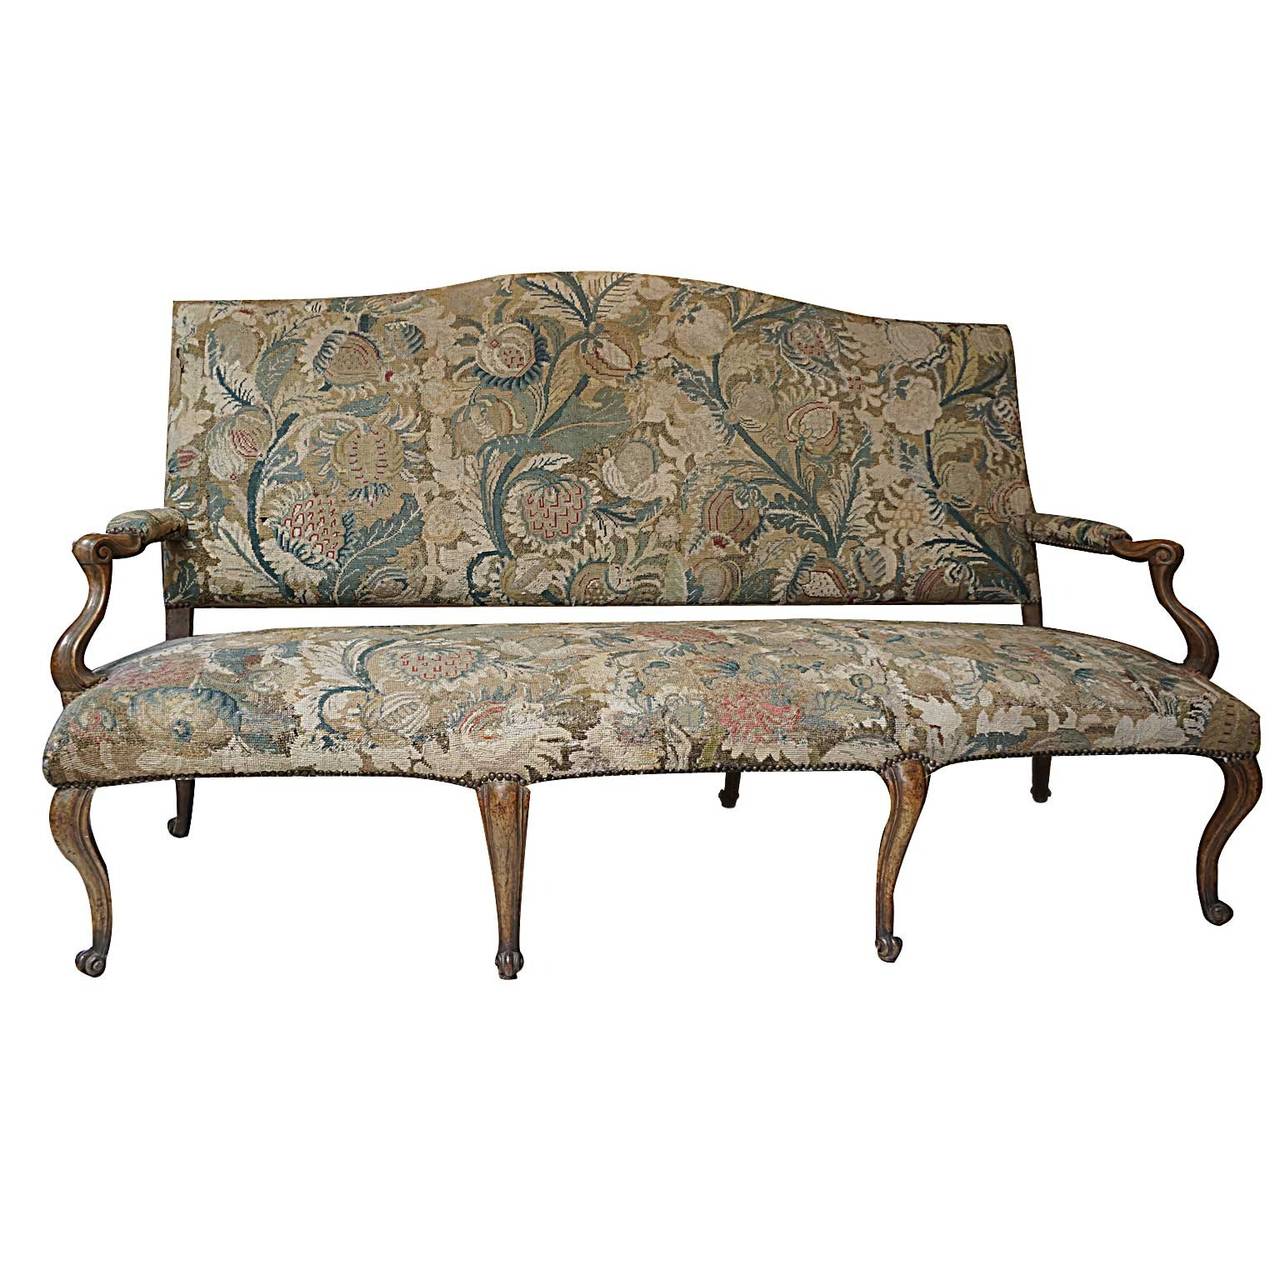 18th century Italian sofa with beautifully carved walnut frame and finely carved cabriole legs with a warm patina. The tapestry upholstery is from the late 18th century-early 19th century and has been removed from the frame, cleaned, restored and